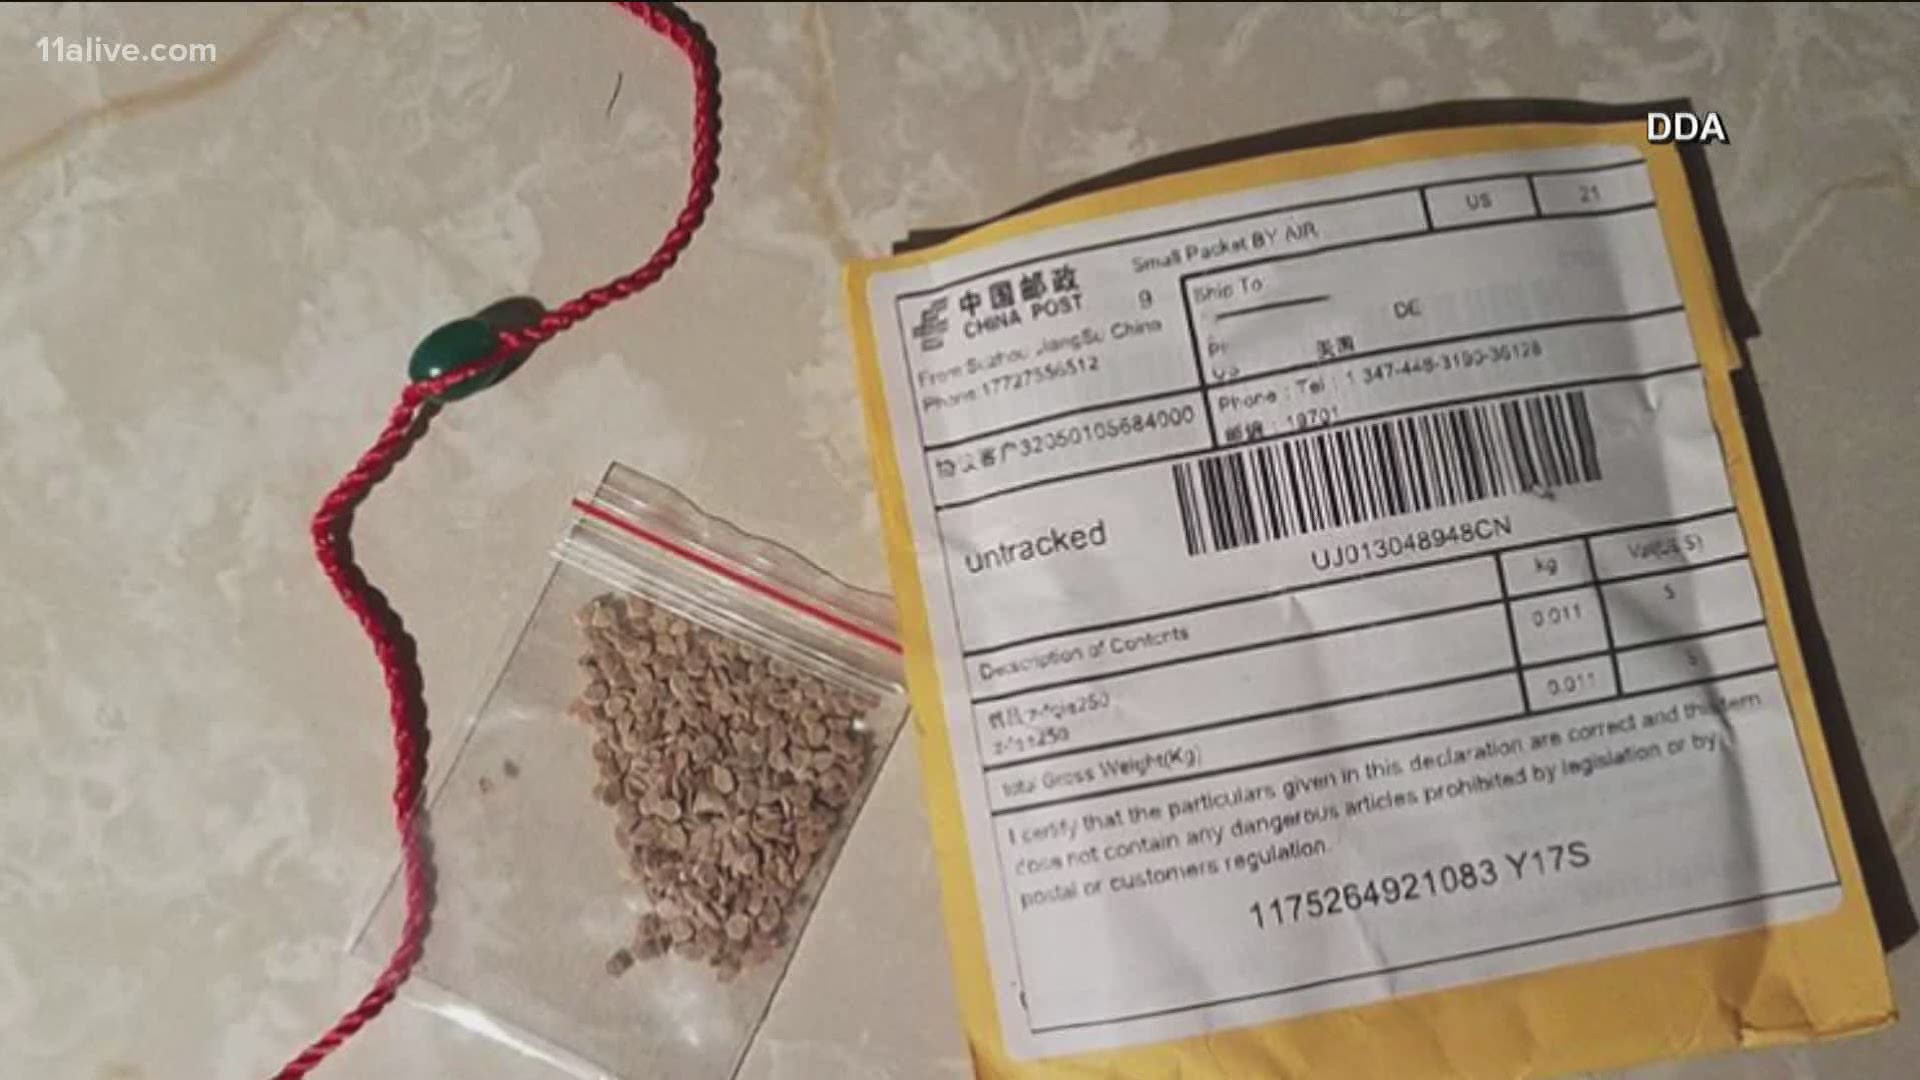 Anyone who has received the seeds in the mail from China or any other country is encouraged to contact the Georgia Department of Agriculture.